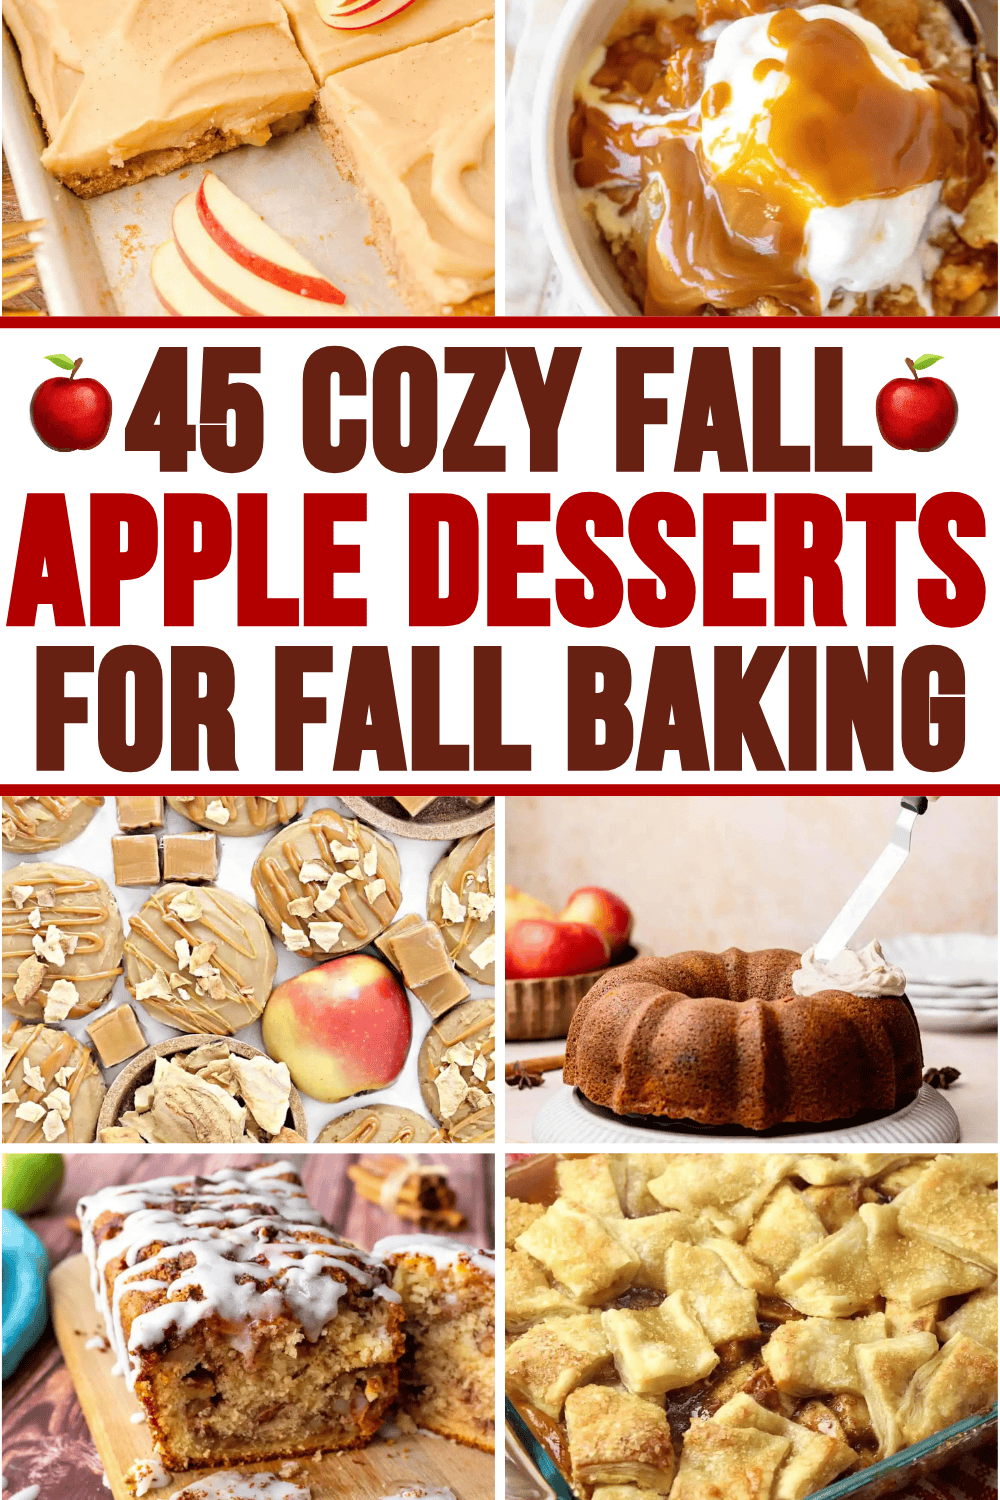 Amazing apple desserts! These unique desserts with apples include cookies, pies, cheesecakes, blondies, quick breads, crisp & cakes. Fresh apple desserts, Thanksgiving apple desserts, desserts with apples, Fall apple dessert recipes healthy, best fall dessert recipes, fall apple treats, simple fall baking recipes, easy fall dessert ideas, Thanksgiving desserts, fall desserts for a crowd, apples recipes easy, apple sweet treats, Christmas desserts, apple bake dessert easy recipes, autumn baking.